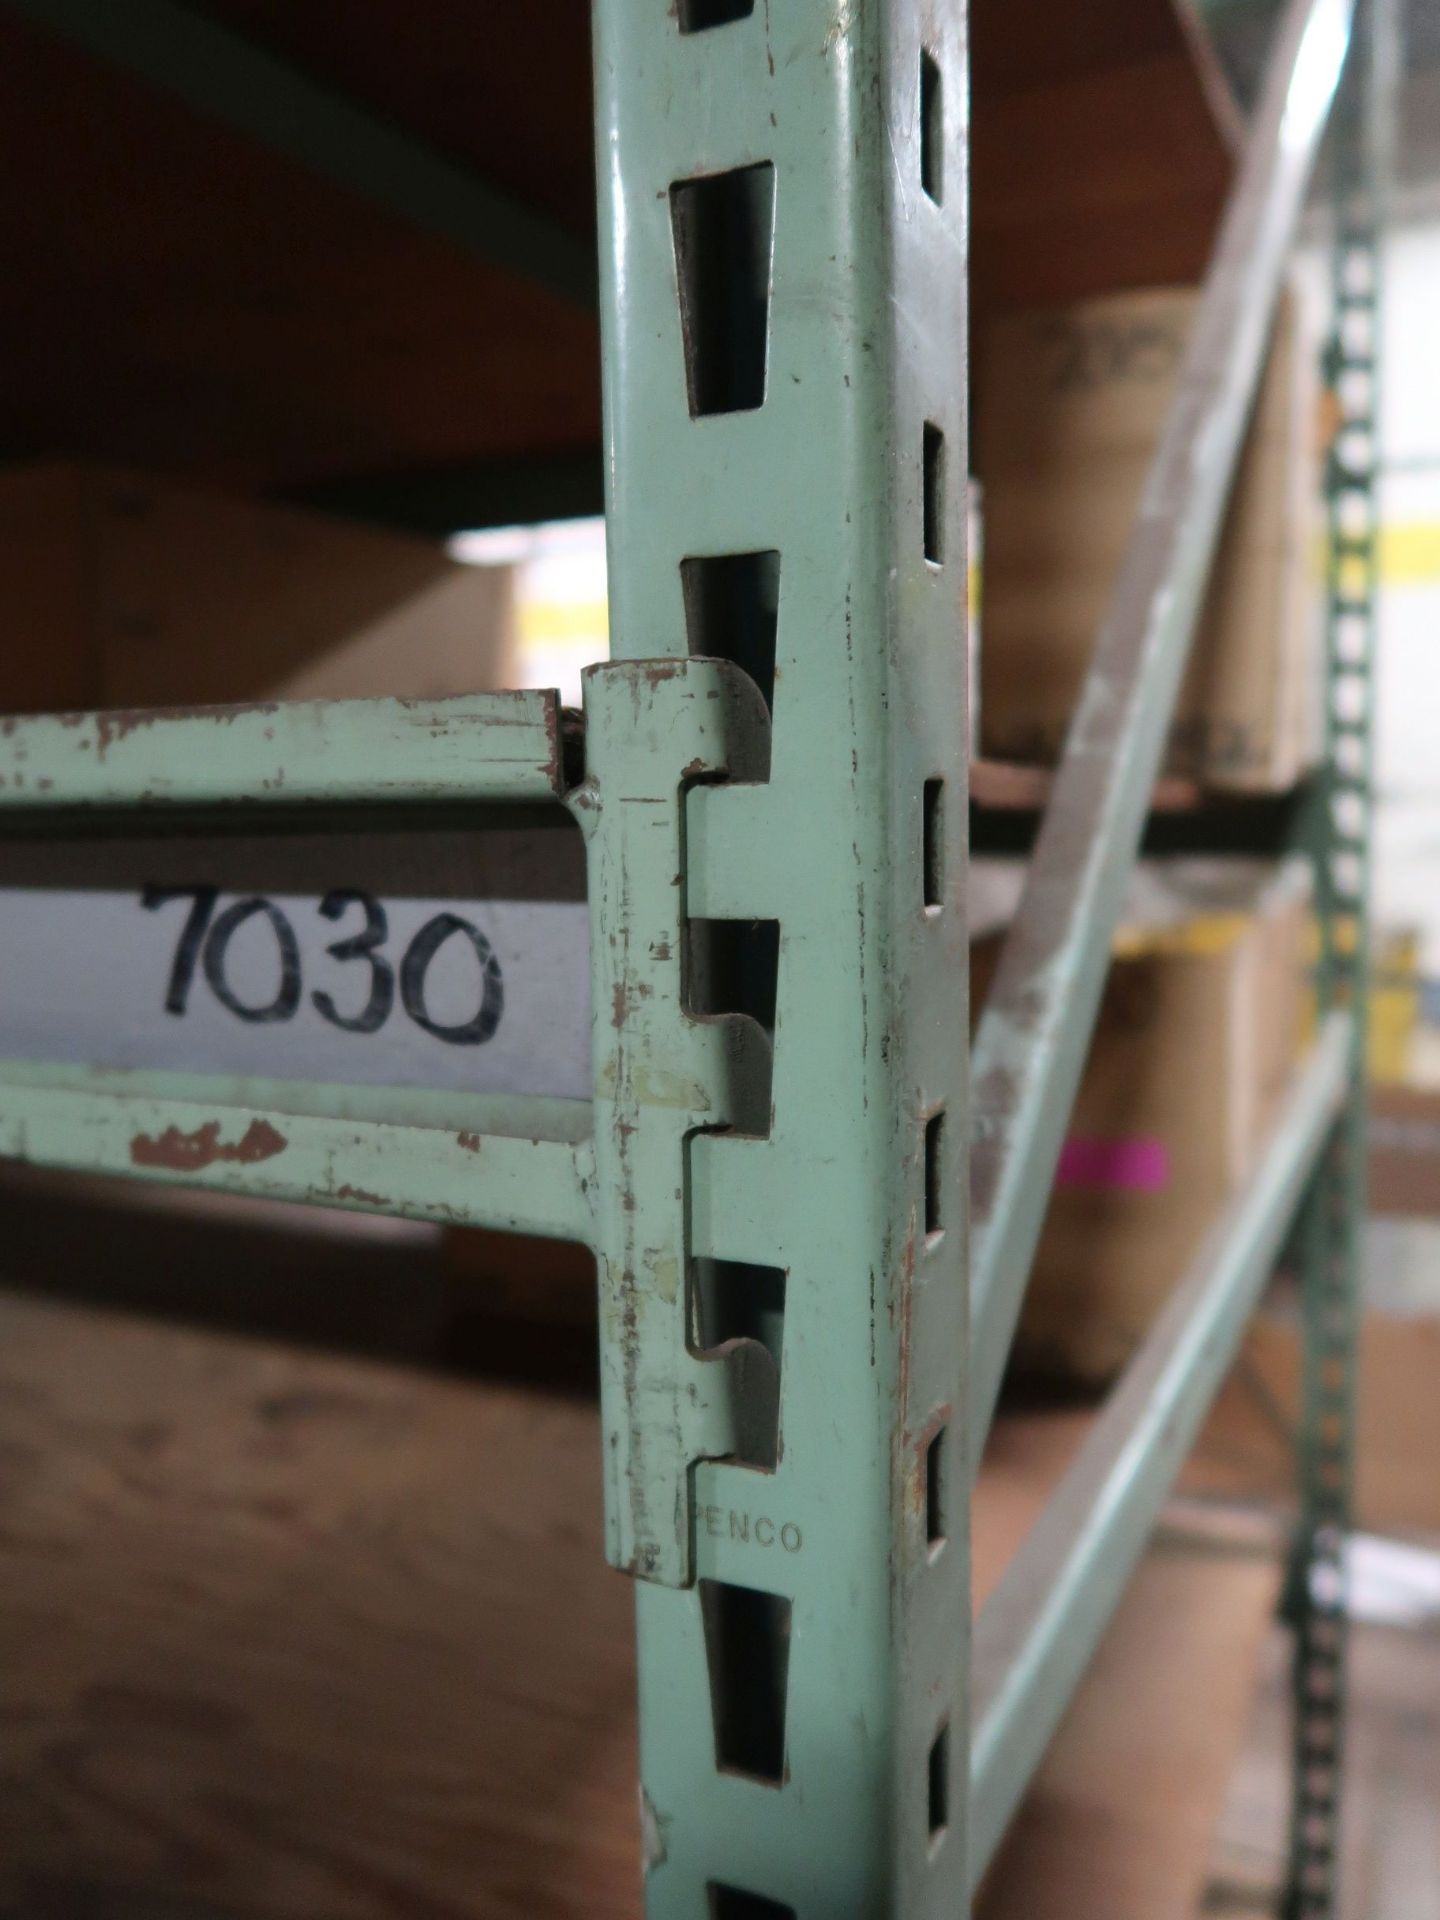 SECTIONS 96" X 48" X 88" ADJUSTABLE BEAM PALLET RACKS - Image 3 of 4